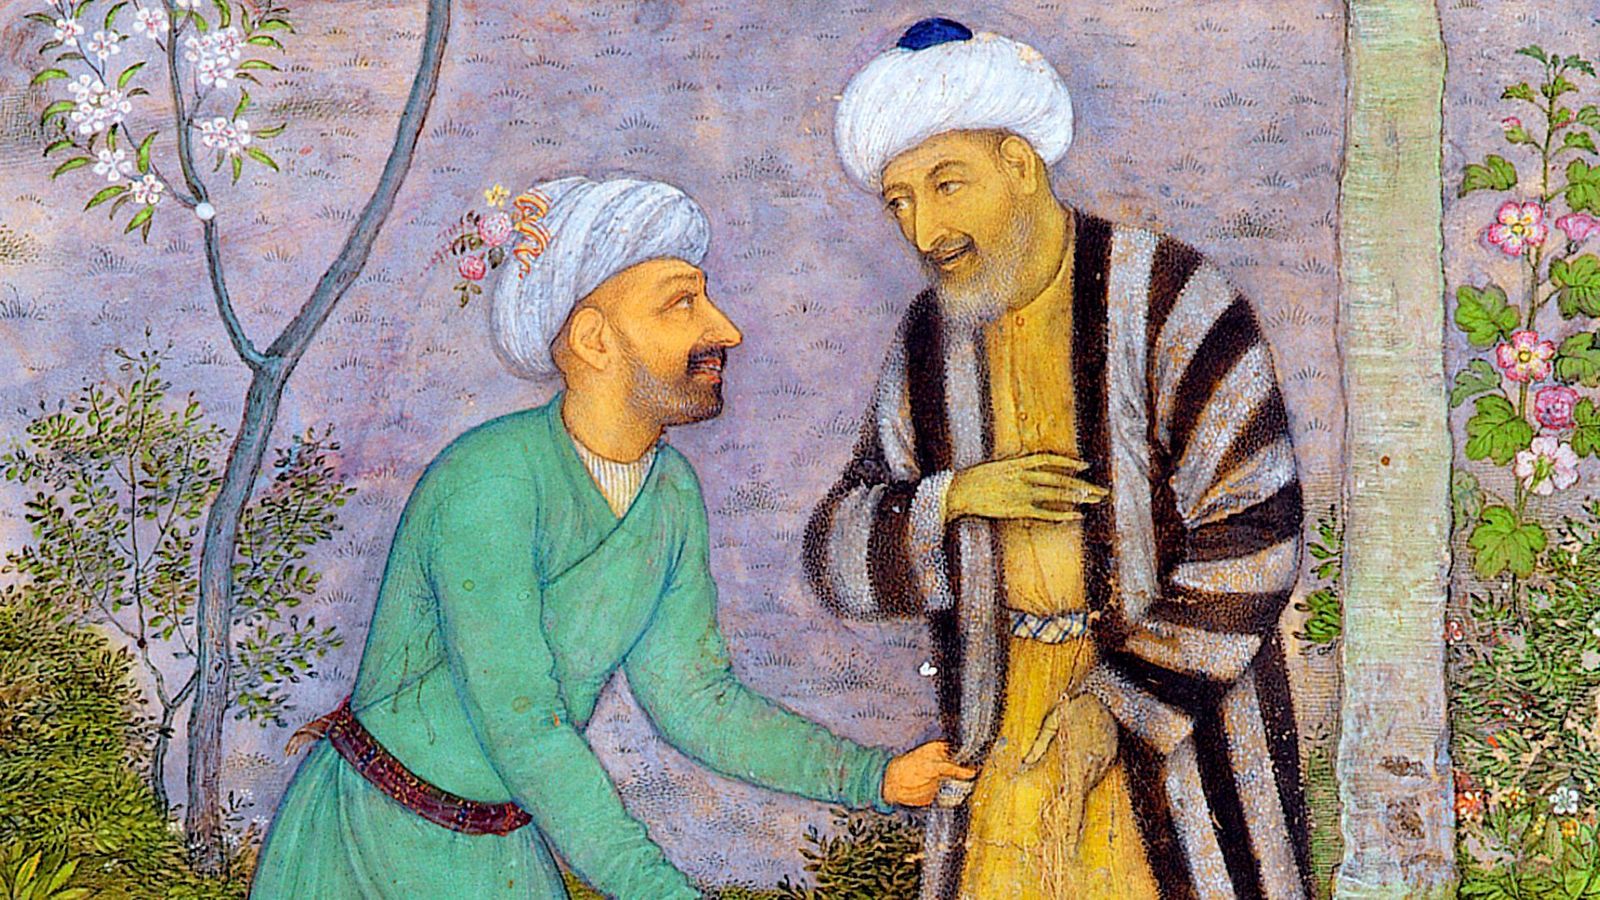 A 13th Century Persian poet s lessons for today LaptrinhX / News